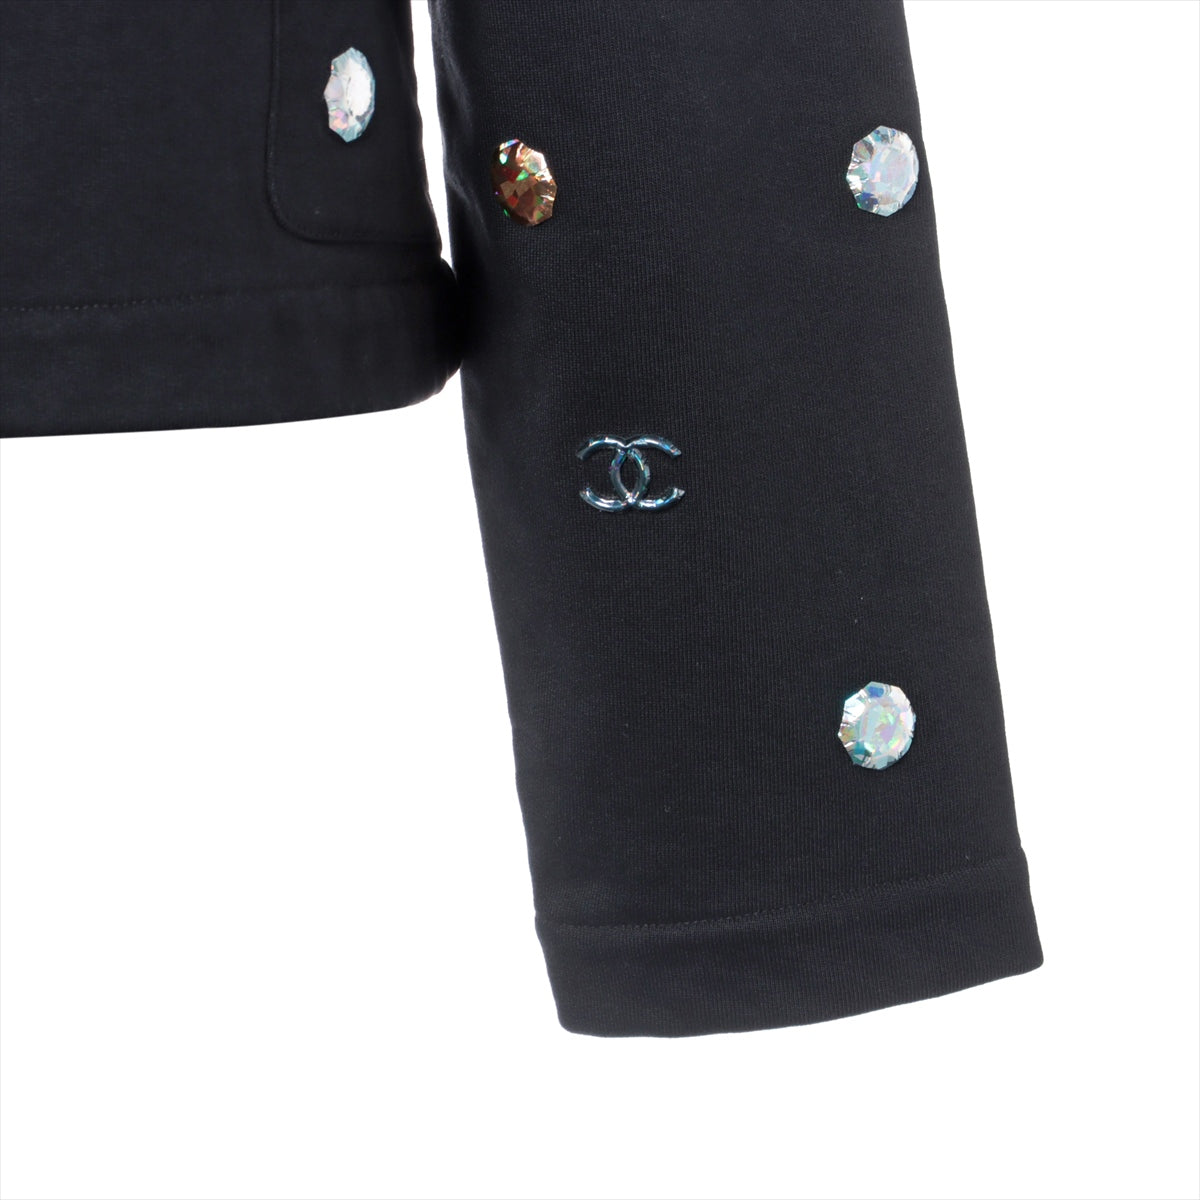 Chanel Coco Button P71 Cotton Cardigan 50 Ladies' Black  P71493K10289 There is a stone thread